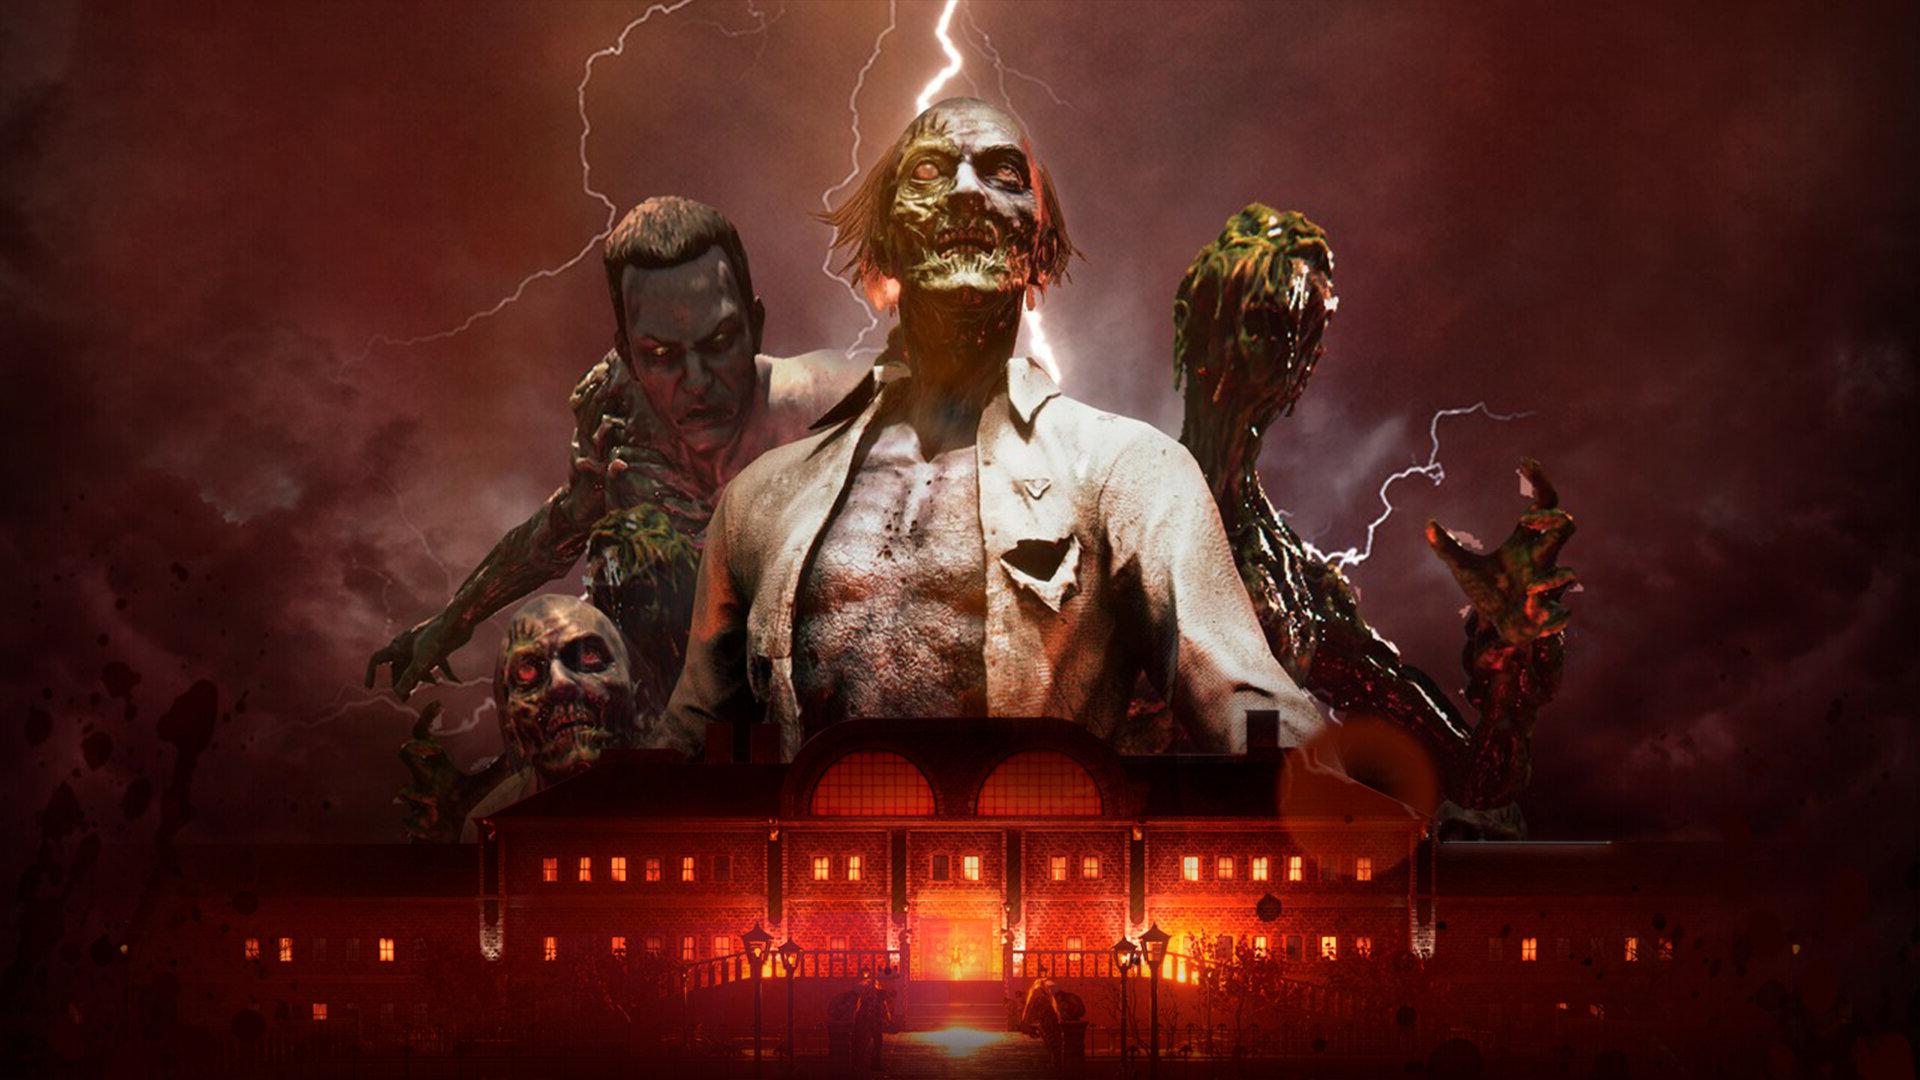 The house of the dead: remake will release on April 7th for Nintendo Switch on the Nintendo Switch News 24